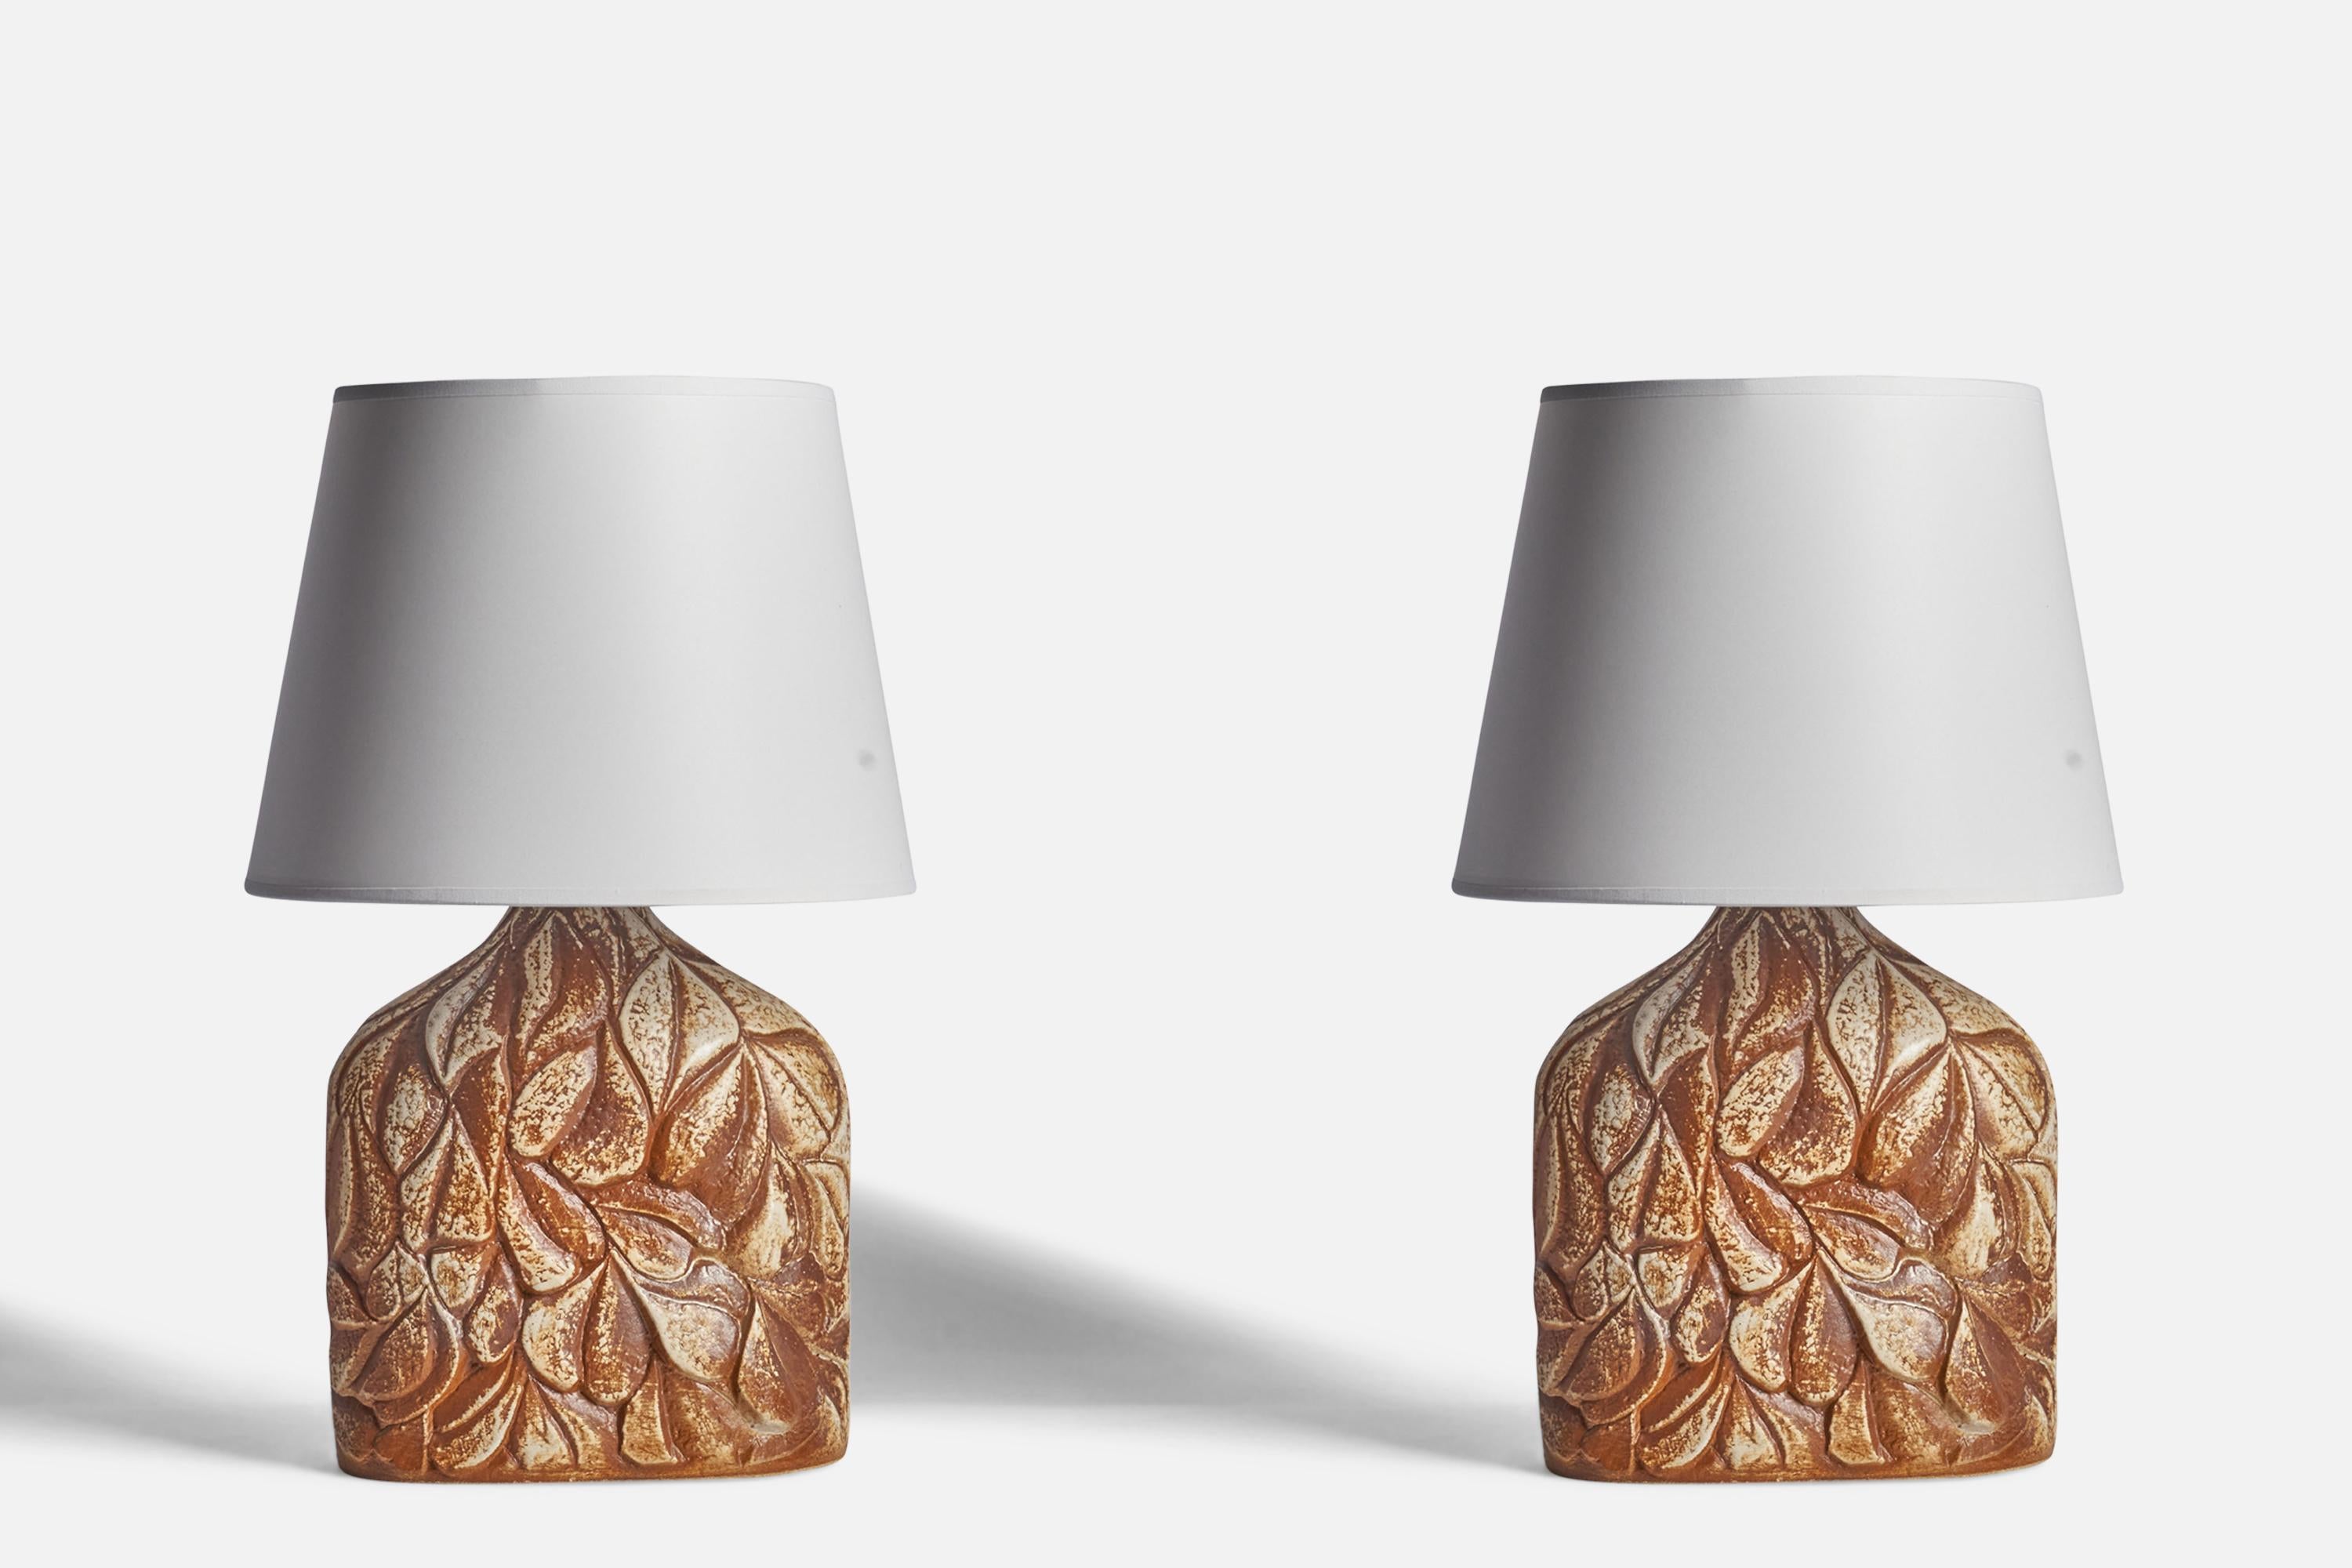 A pair of grey and brown-glazed stoneware table lamp designed by Haico Nitzsche and produced by Søholm, Denmark, 1960s.

Dimensions of Lamp (inches): 14” H x 9” W x 5” D 
Dimensions of Shade (inches): 9” Top Diameter x 12” Bottom Diameter x 9”